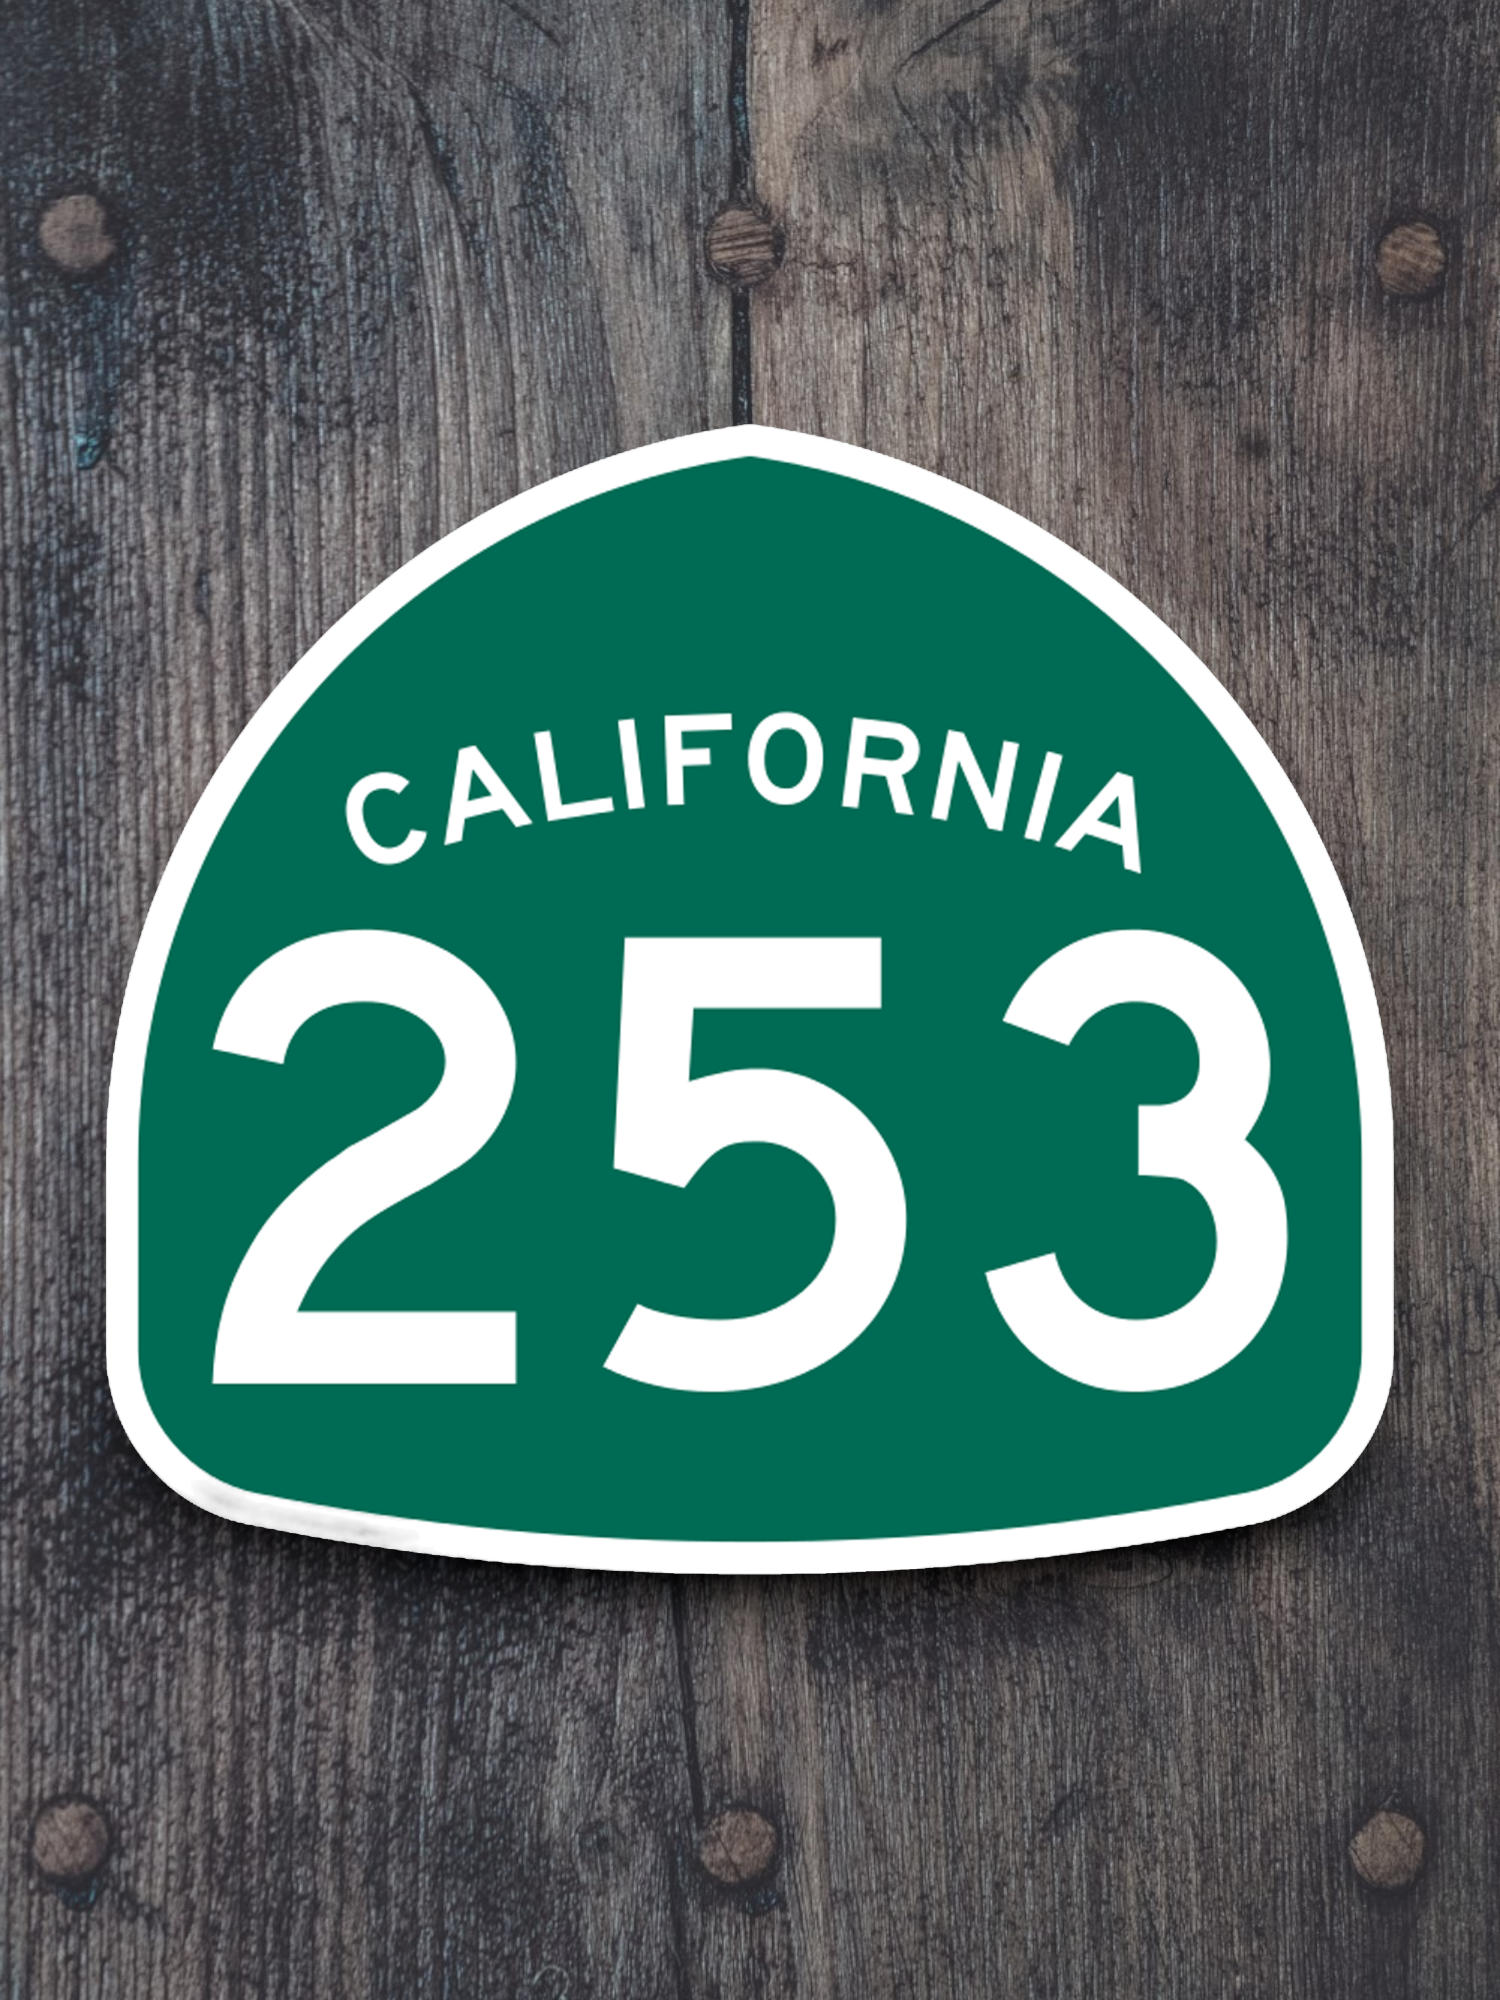 California State Route 253 Road Sign Sticker